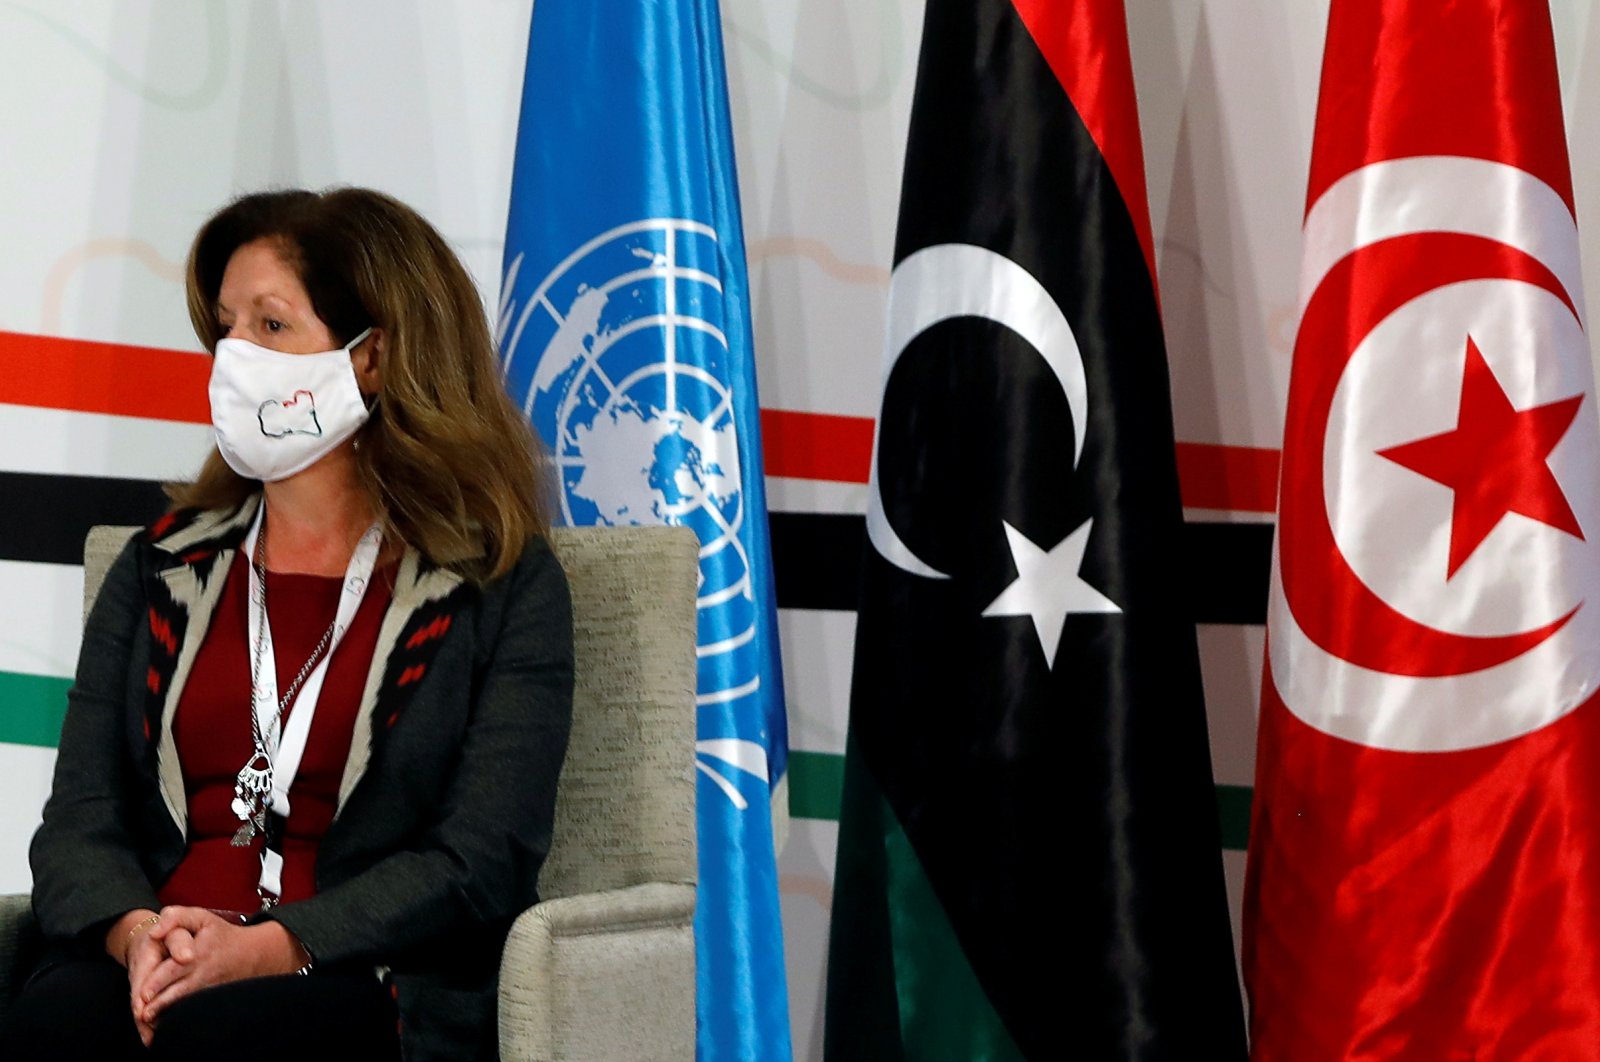 Deputy Special Representative of the U.N. Secretary-General for Political Affairs in Libya Stephanie Williams attends the Libyan Political Dialogue Forum in Tunis, Tunisia, Nov. 9, 2020. (REUTERS Photo)